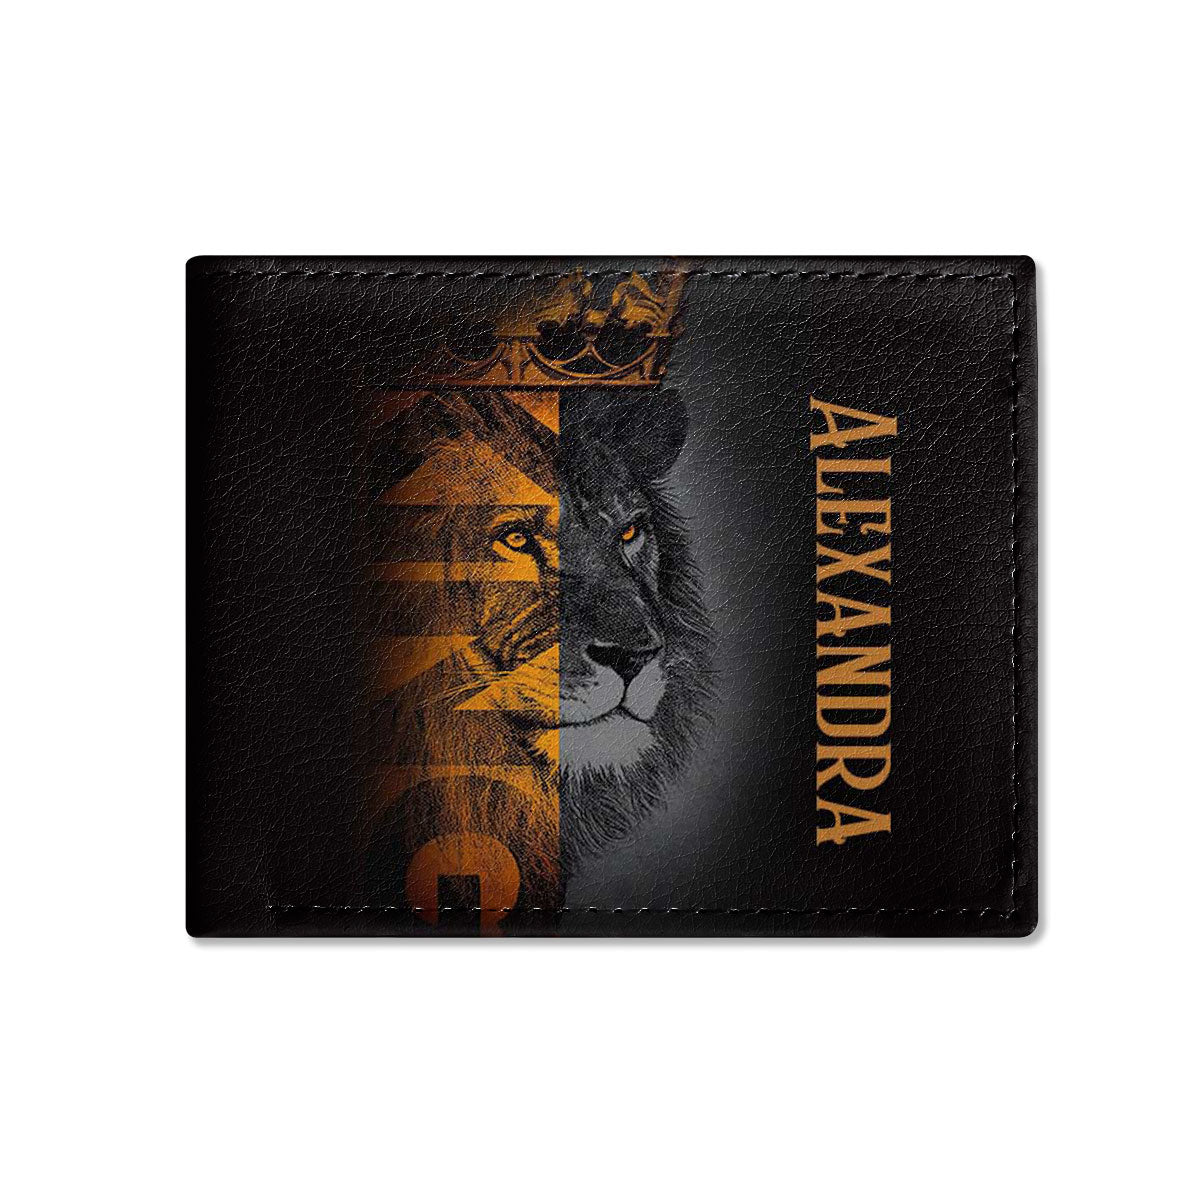 Be Strong | Personalized Folded Wallet For Men JSLFWM1032